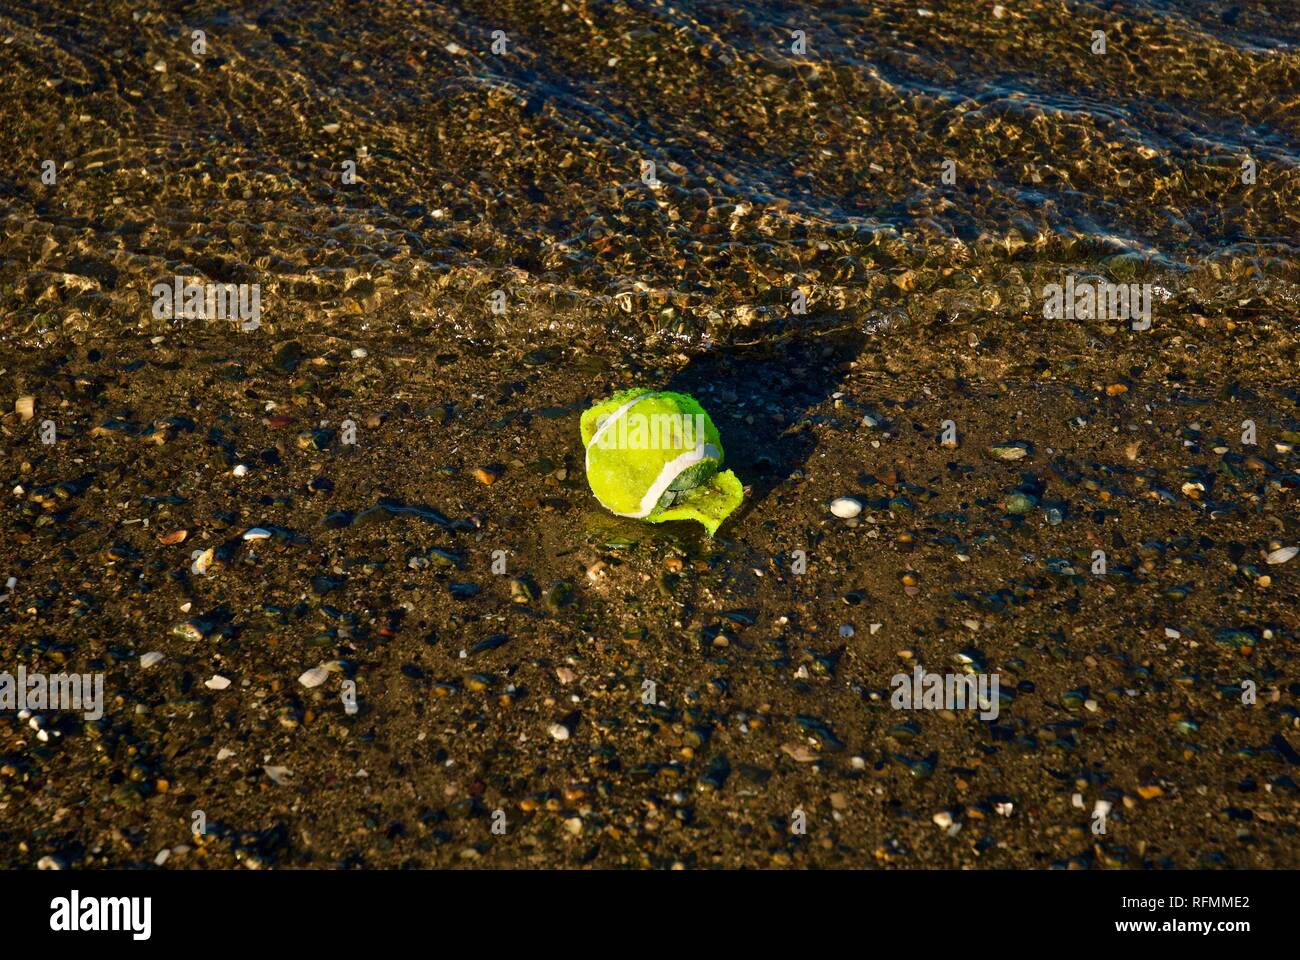 Plastic waste and pollution washed up on a beach in Rhosneigr, Anglesey, North Wales, UK Stock Photo